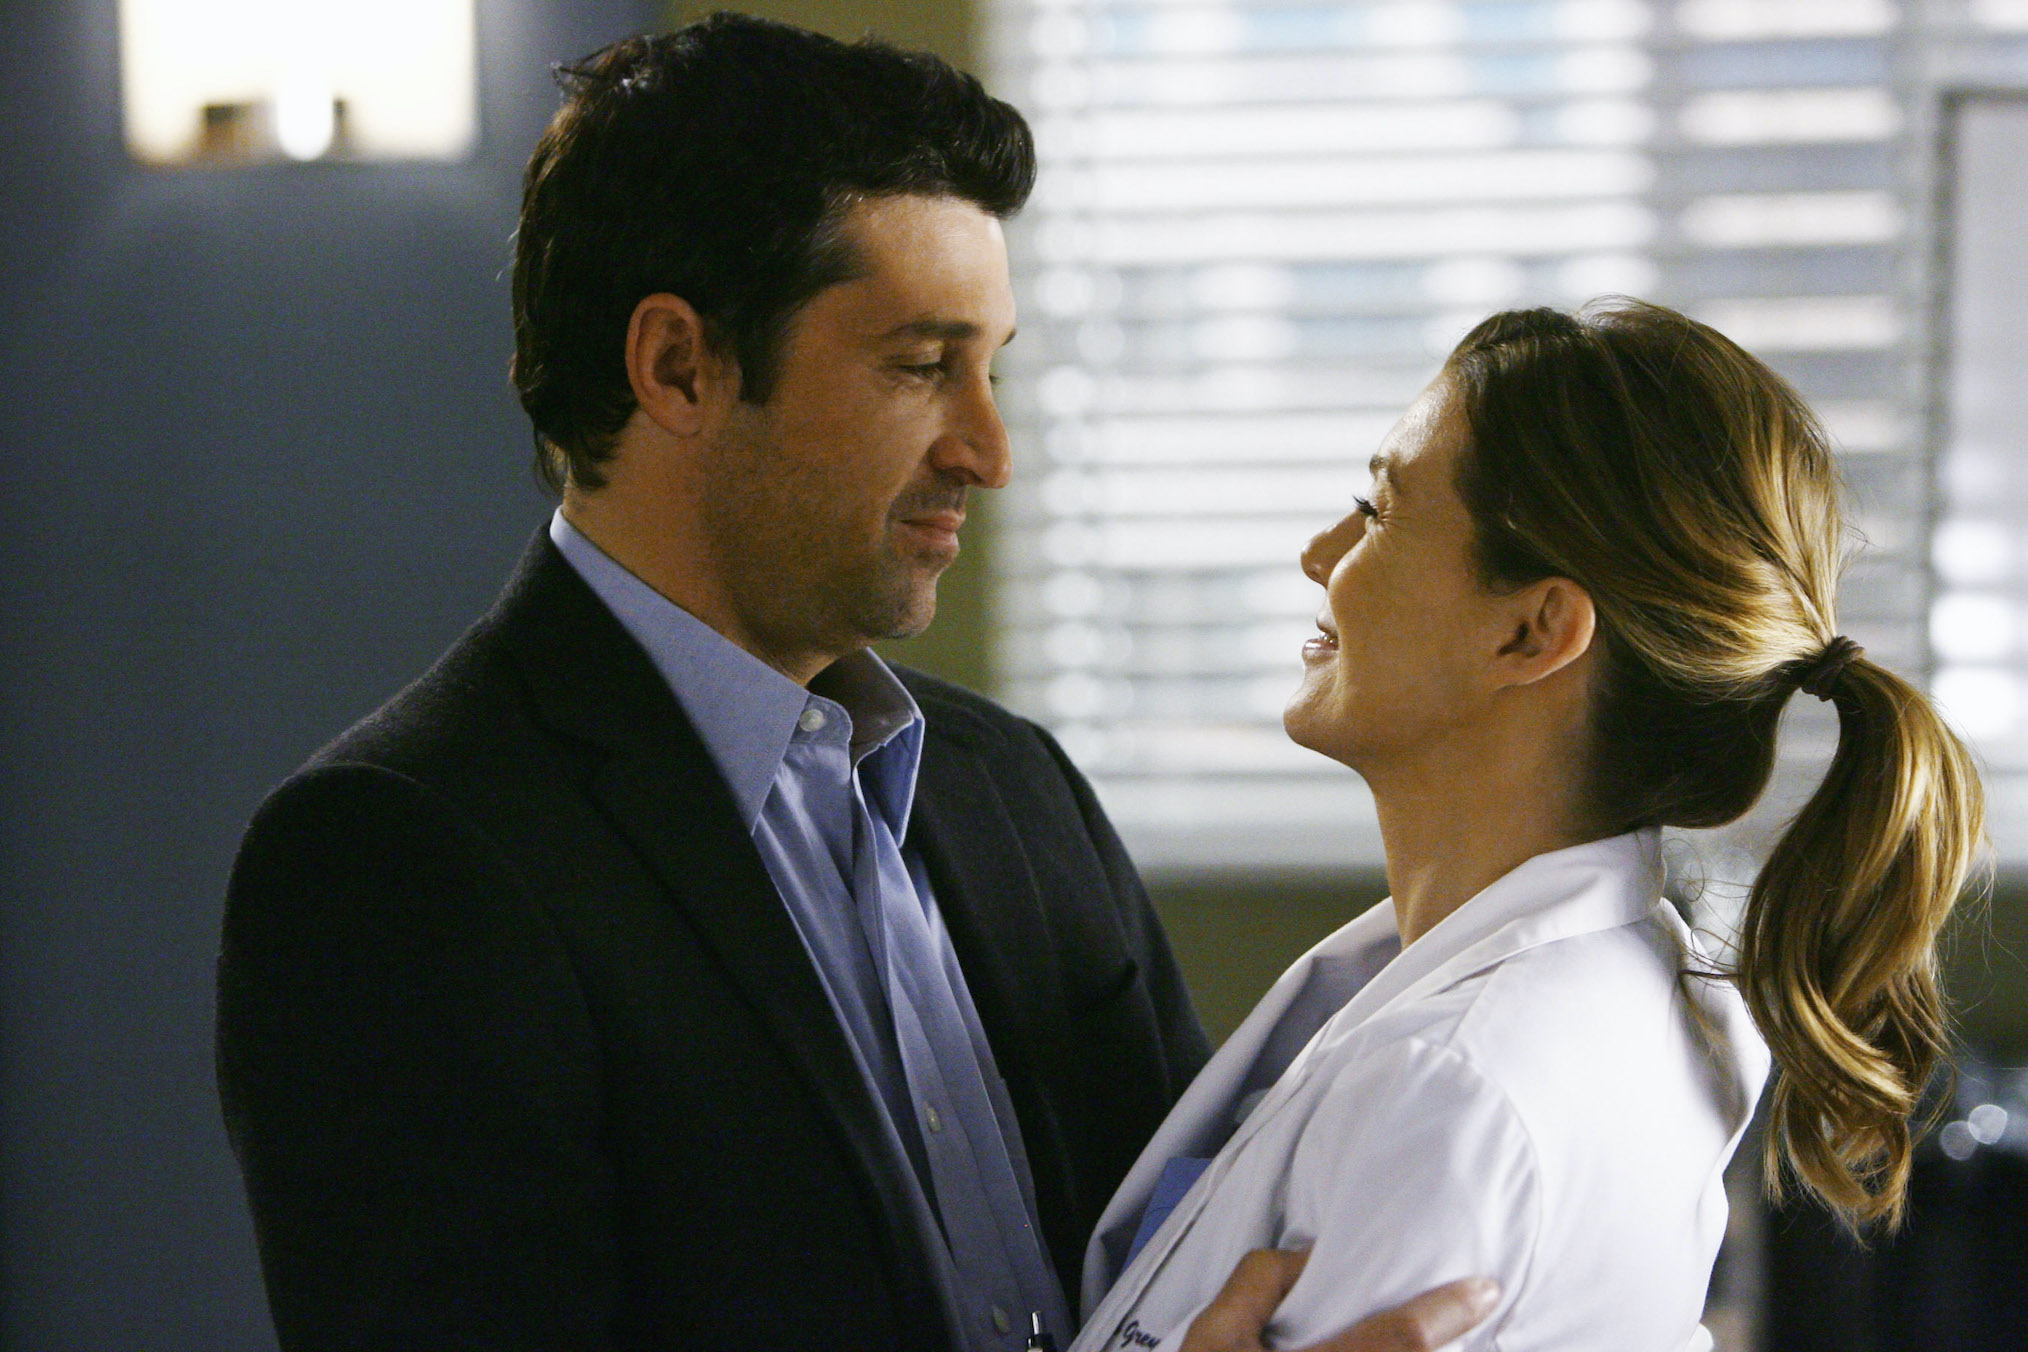 10 Best 'Grey's Anatomy' Episodes Out of the 400, According to Fans